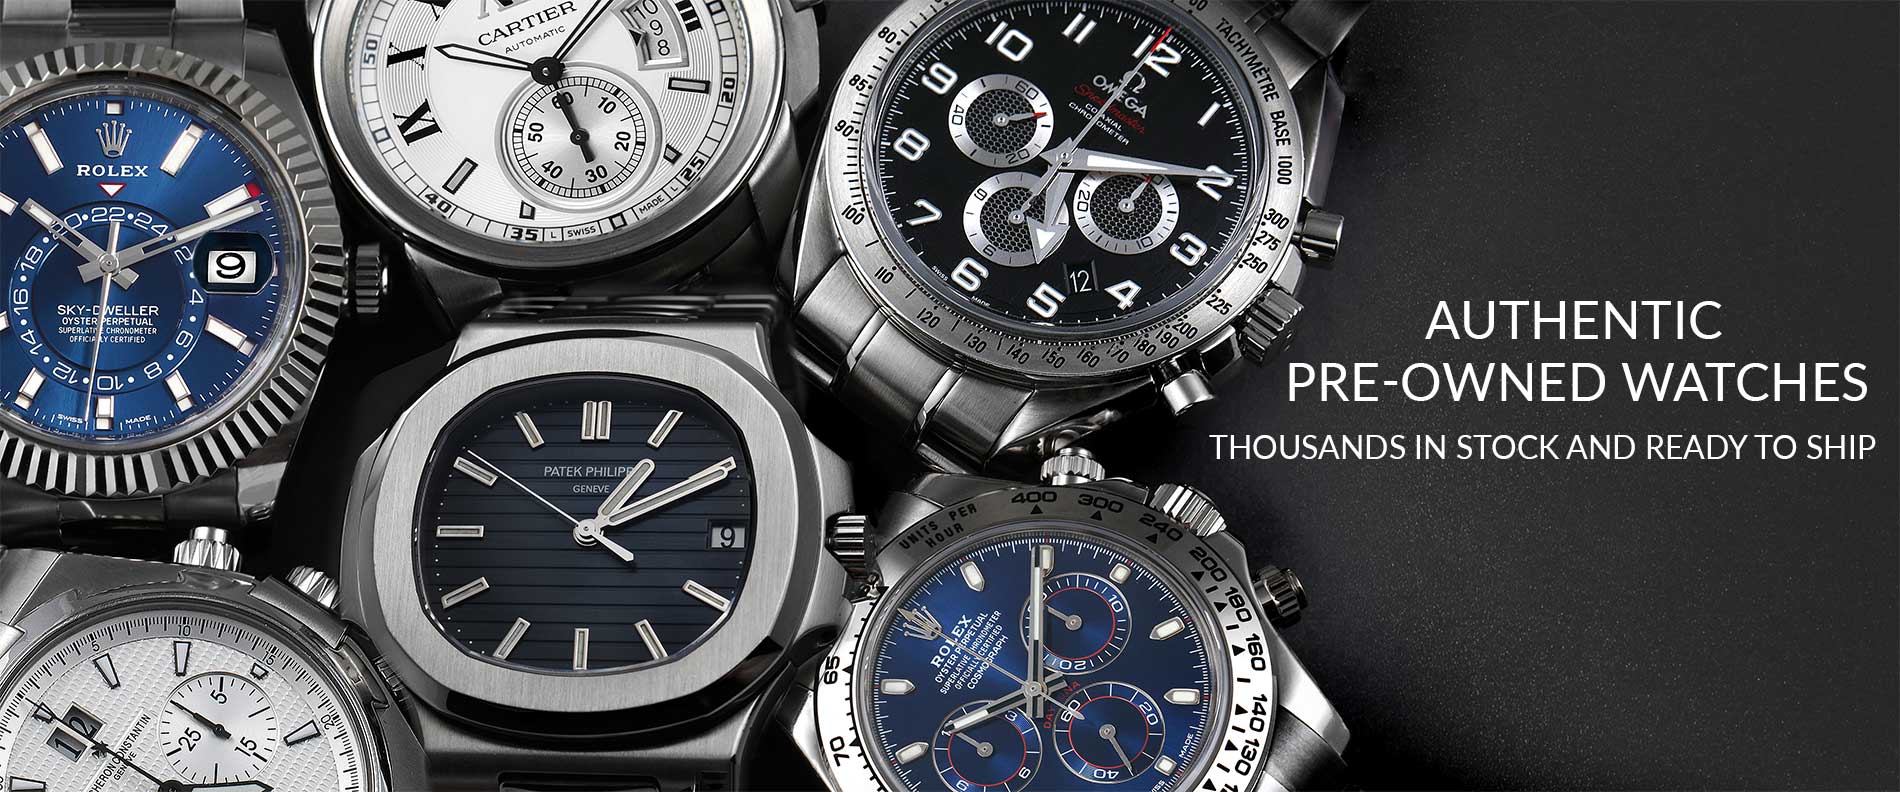 Discover the Latest Authentic Watch Brands for Men & Women at Helios Watch  Store